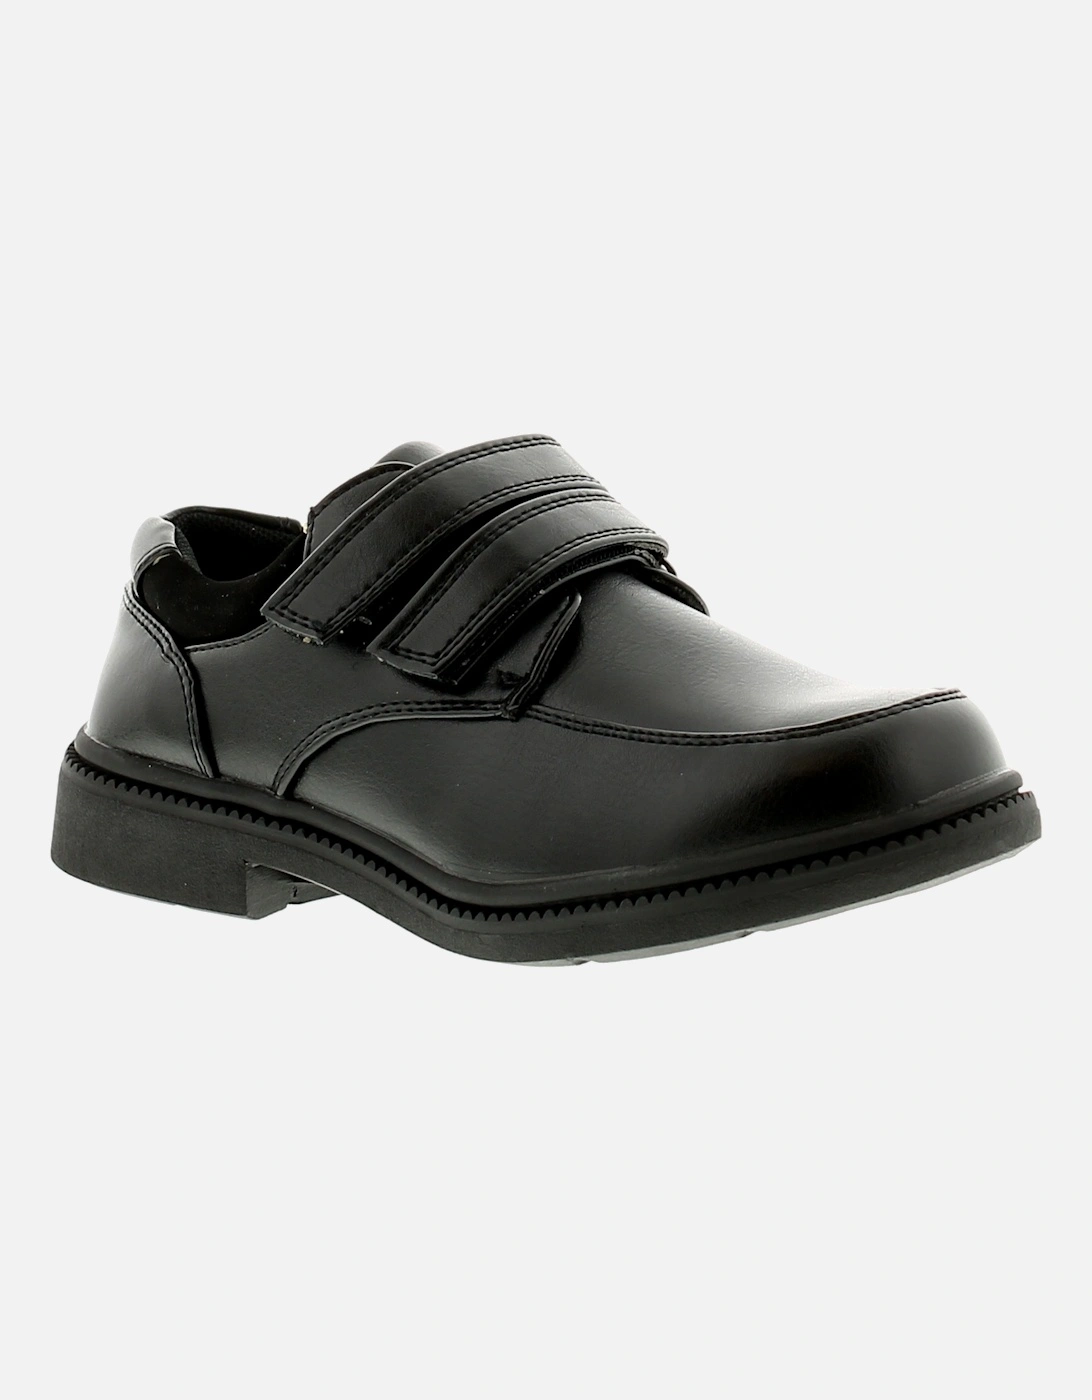 Boys School Shoes Phillip Touch Fastening black UK Size, 6 of 5